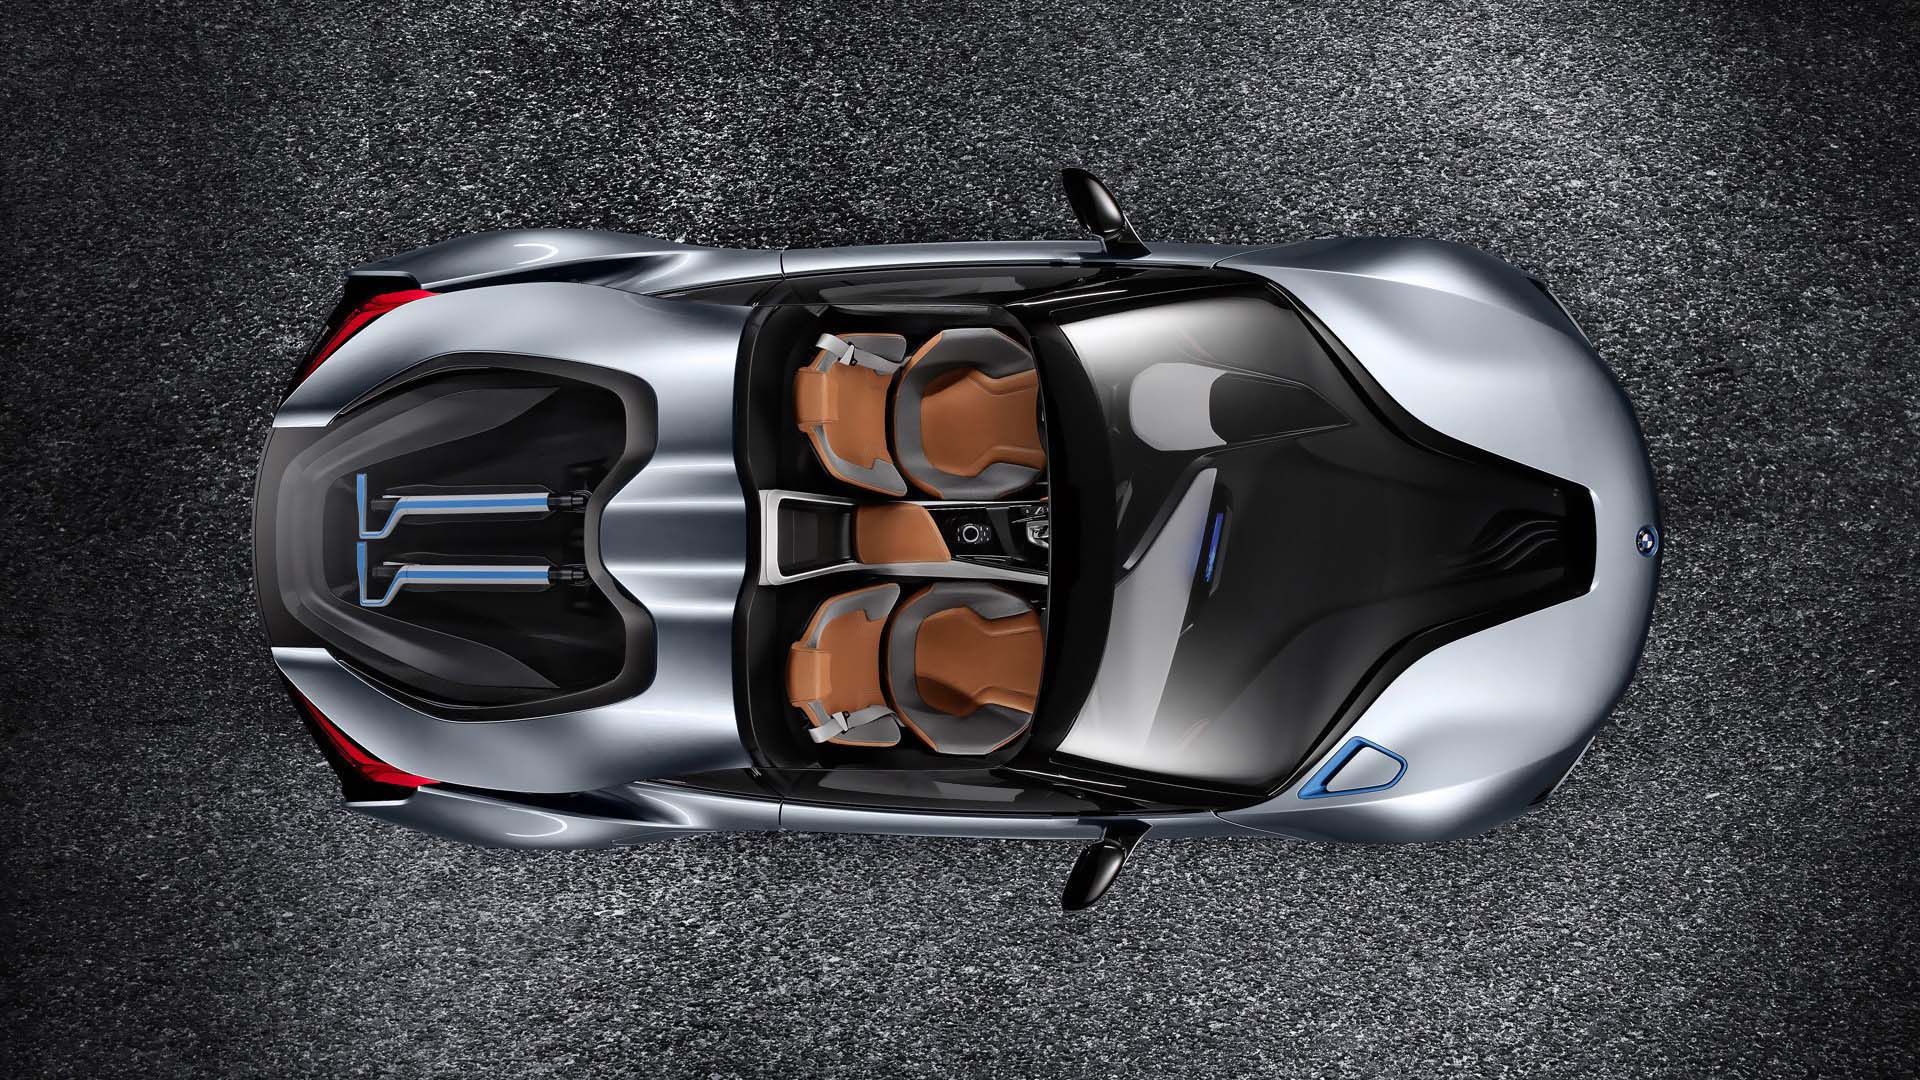 Bmw I8 Concept Spyder Top View Wallpaper - Car Above People - HD Wallpaper 